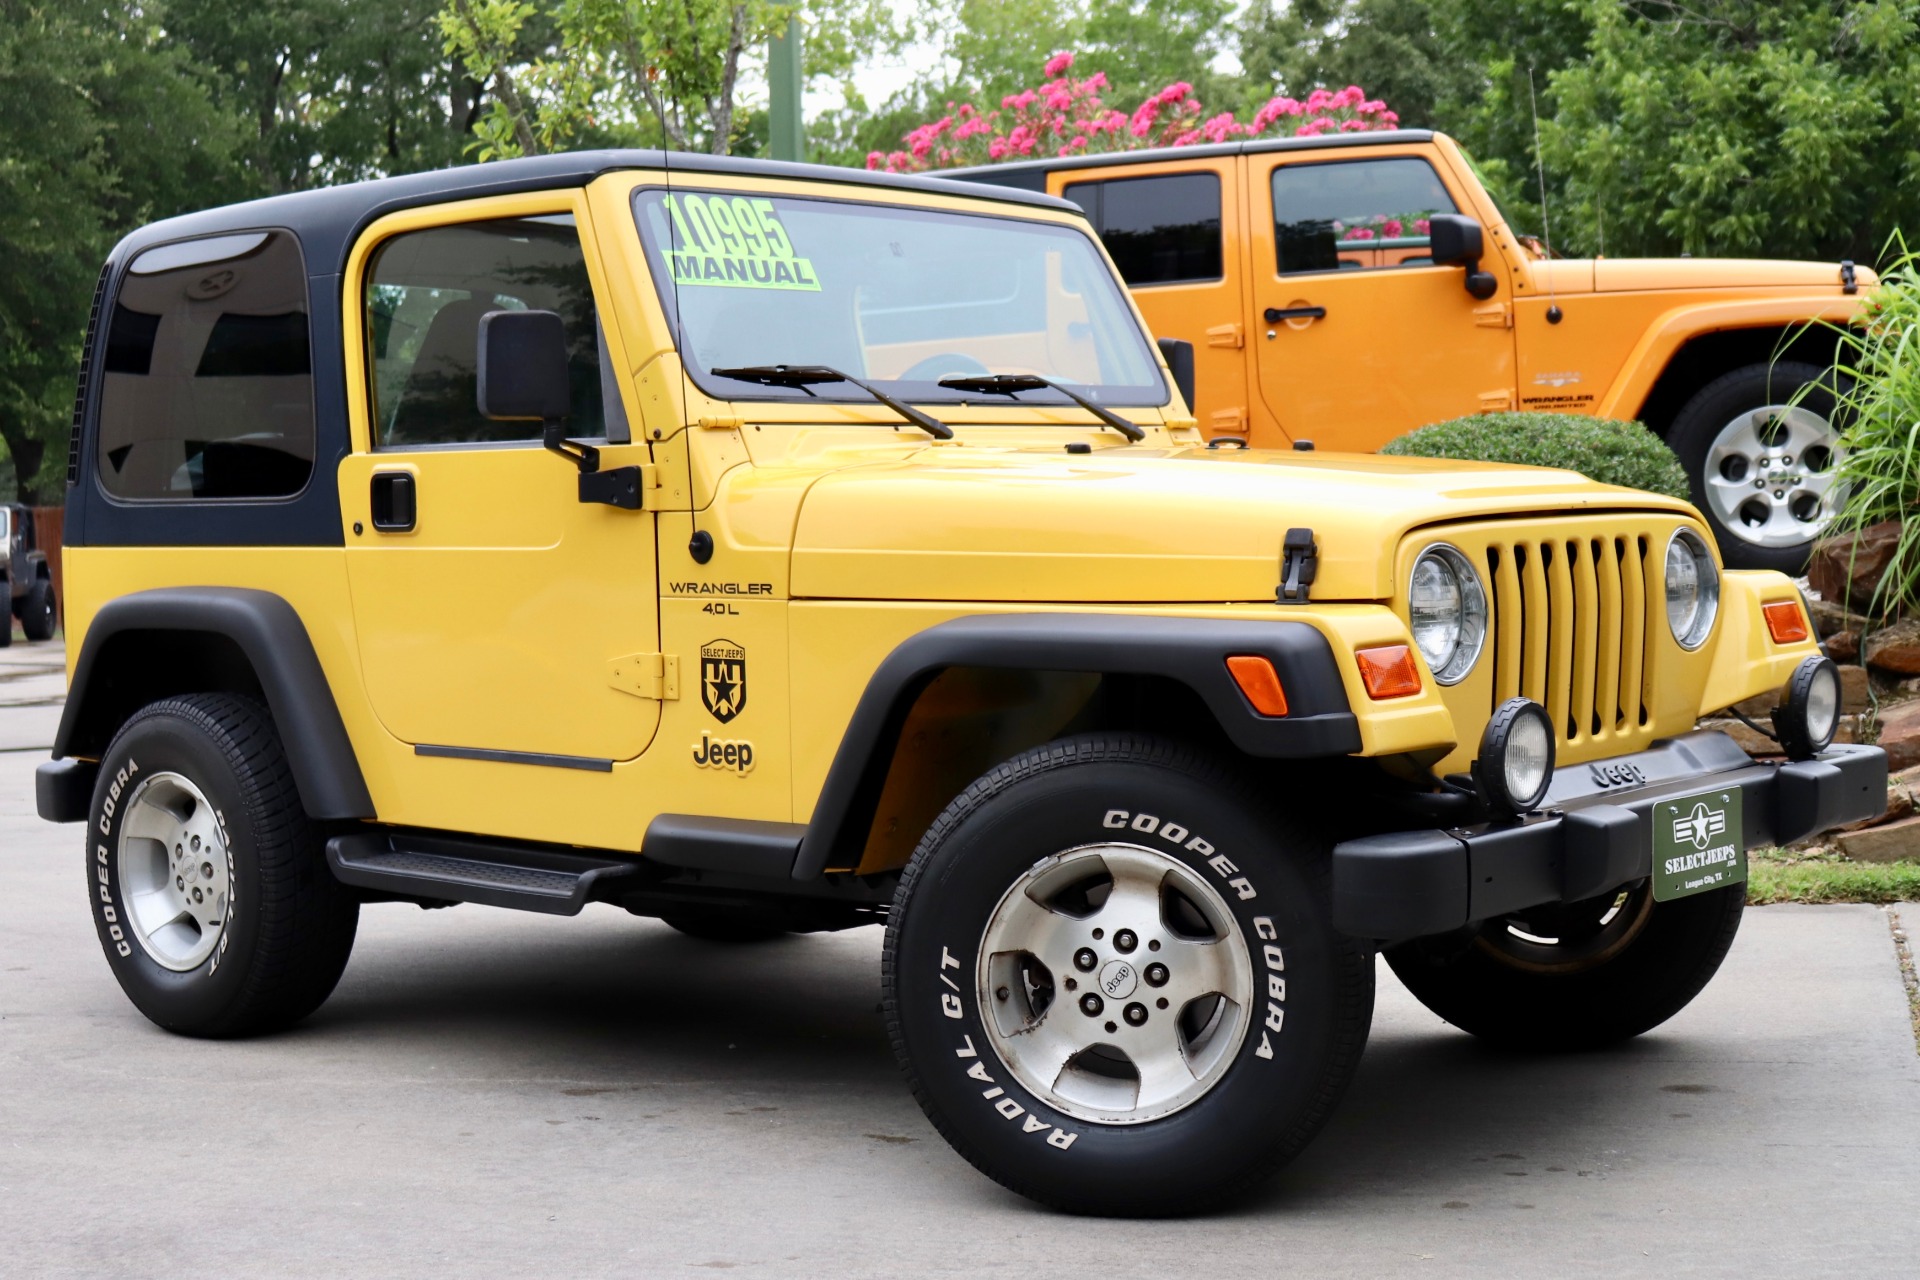 Used 2000 Jeep Wrangler 2dr Sport For Sale ($10,995) | Select Jeeps Inc.  Stock #705775